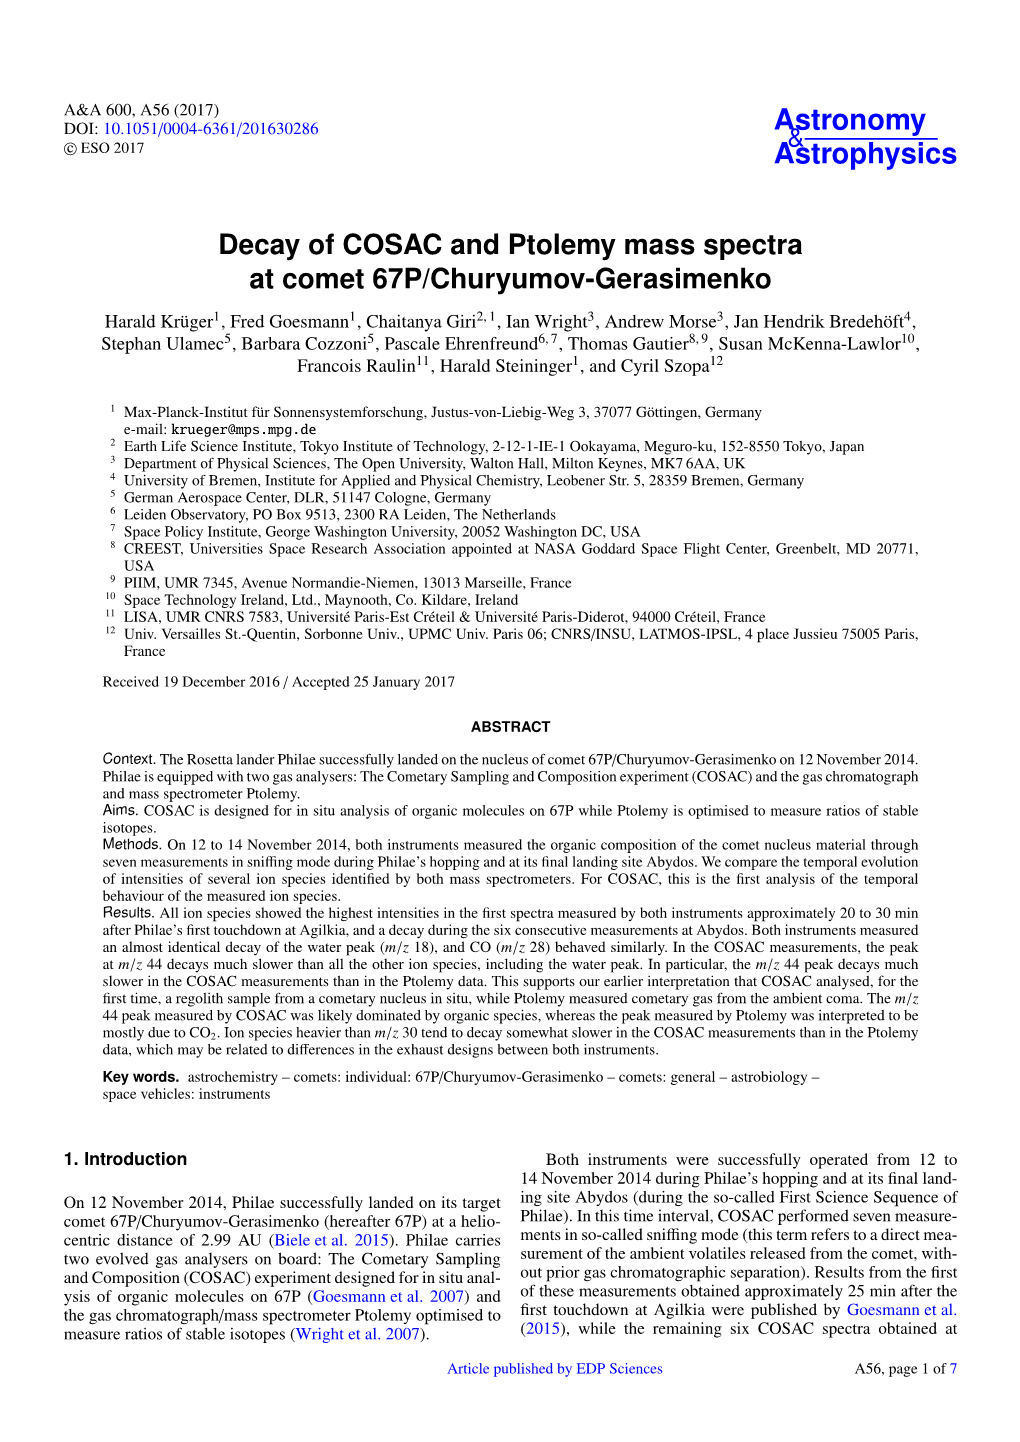 Decay of COSAC and Ptolemy Mass Spectra